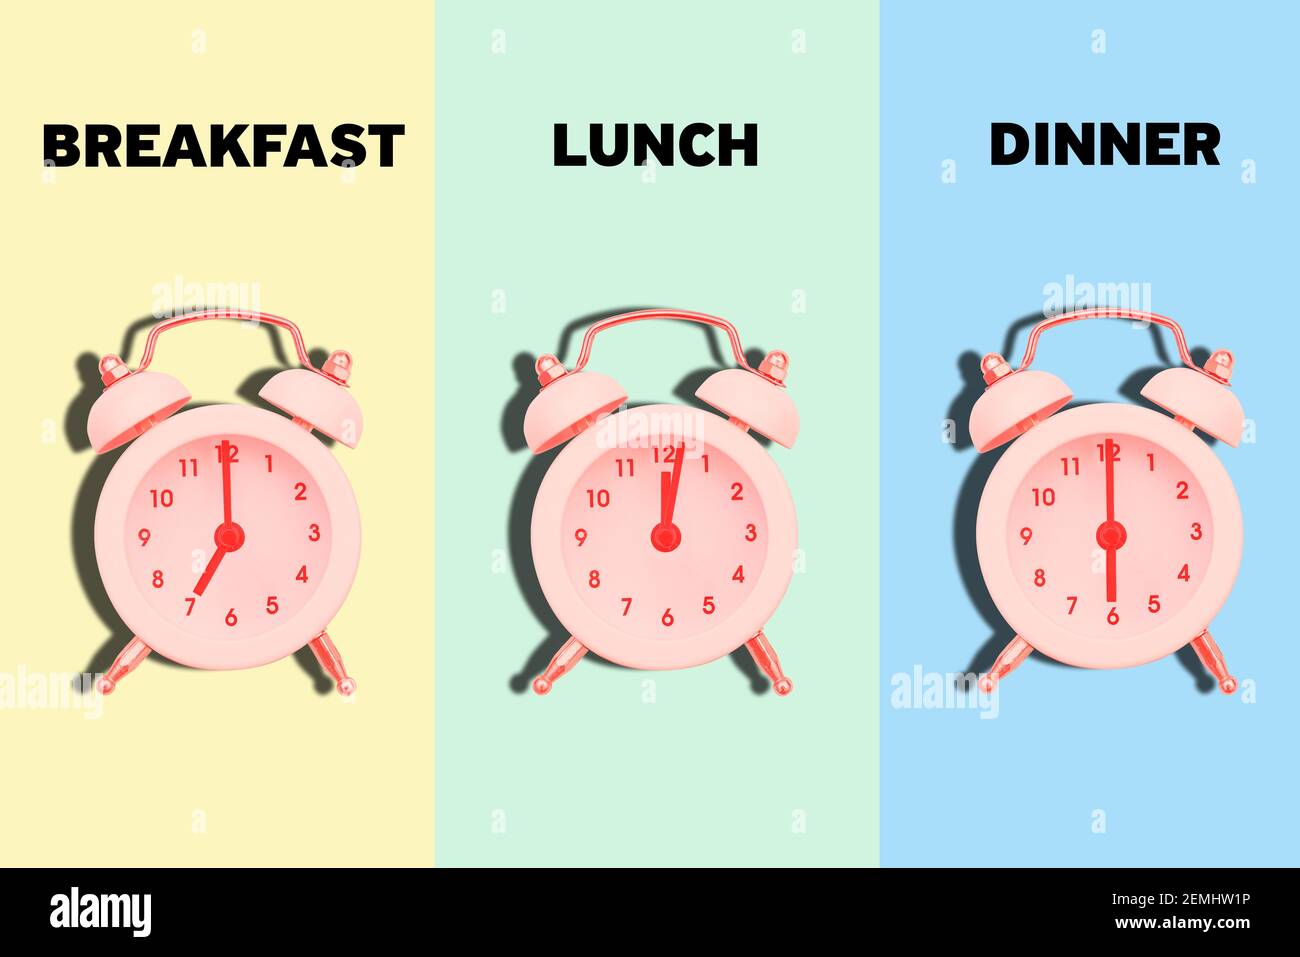 [Image: meal-schedule-time-for-breakfast-lunch-a...EMHW1P.jpg]